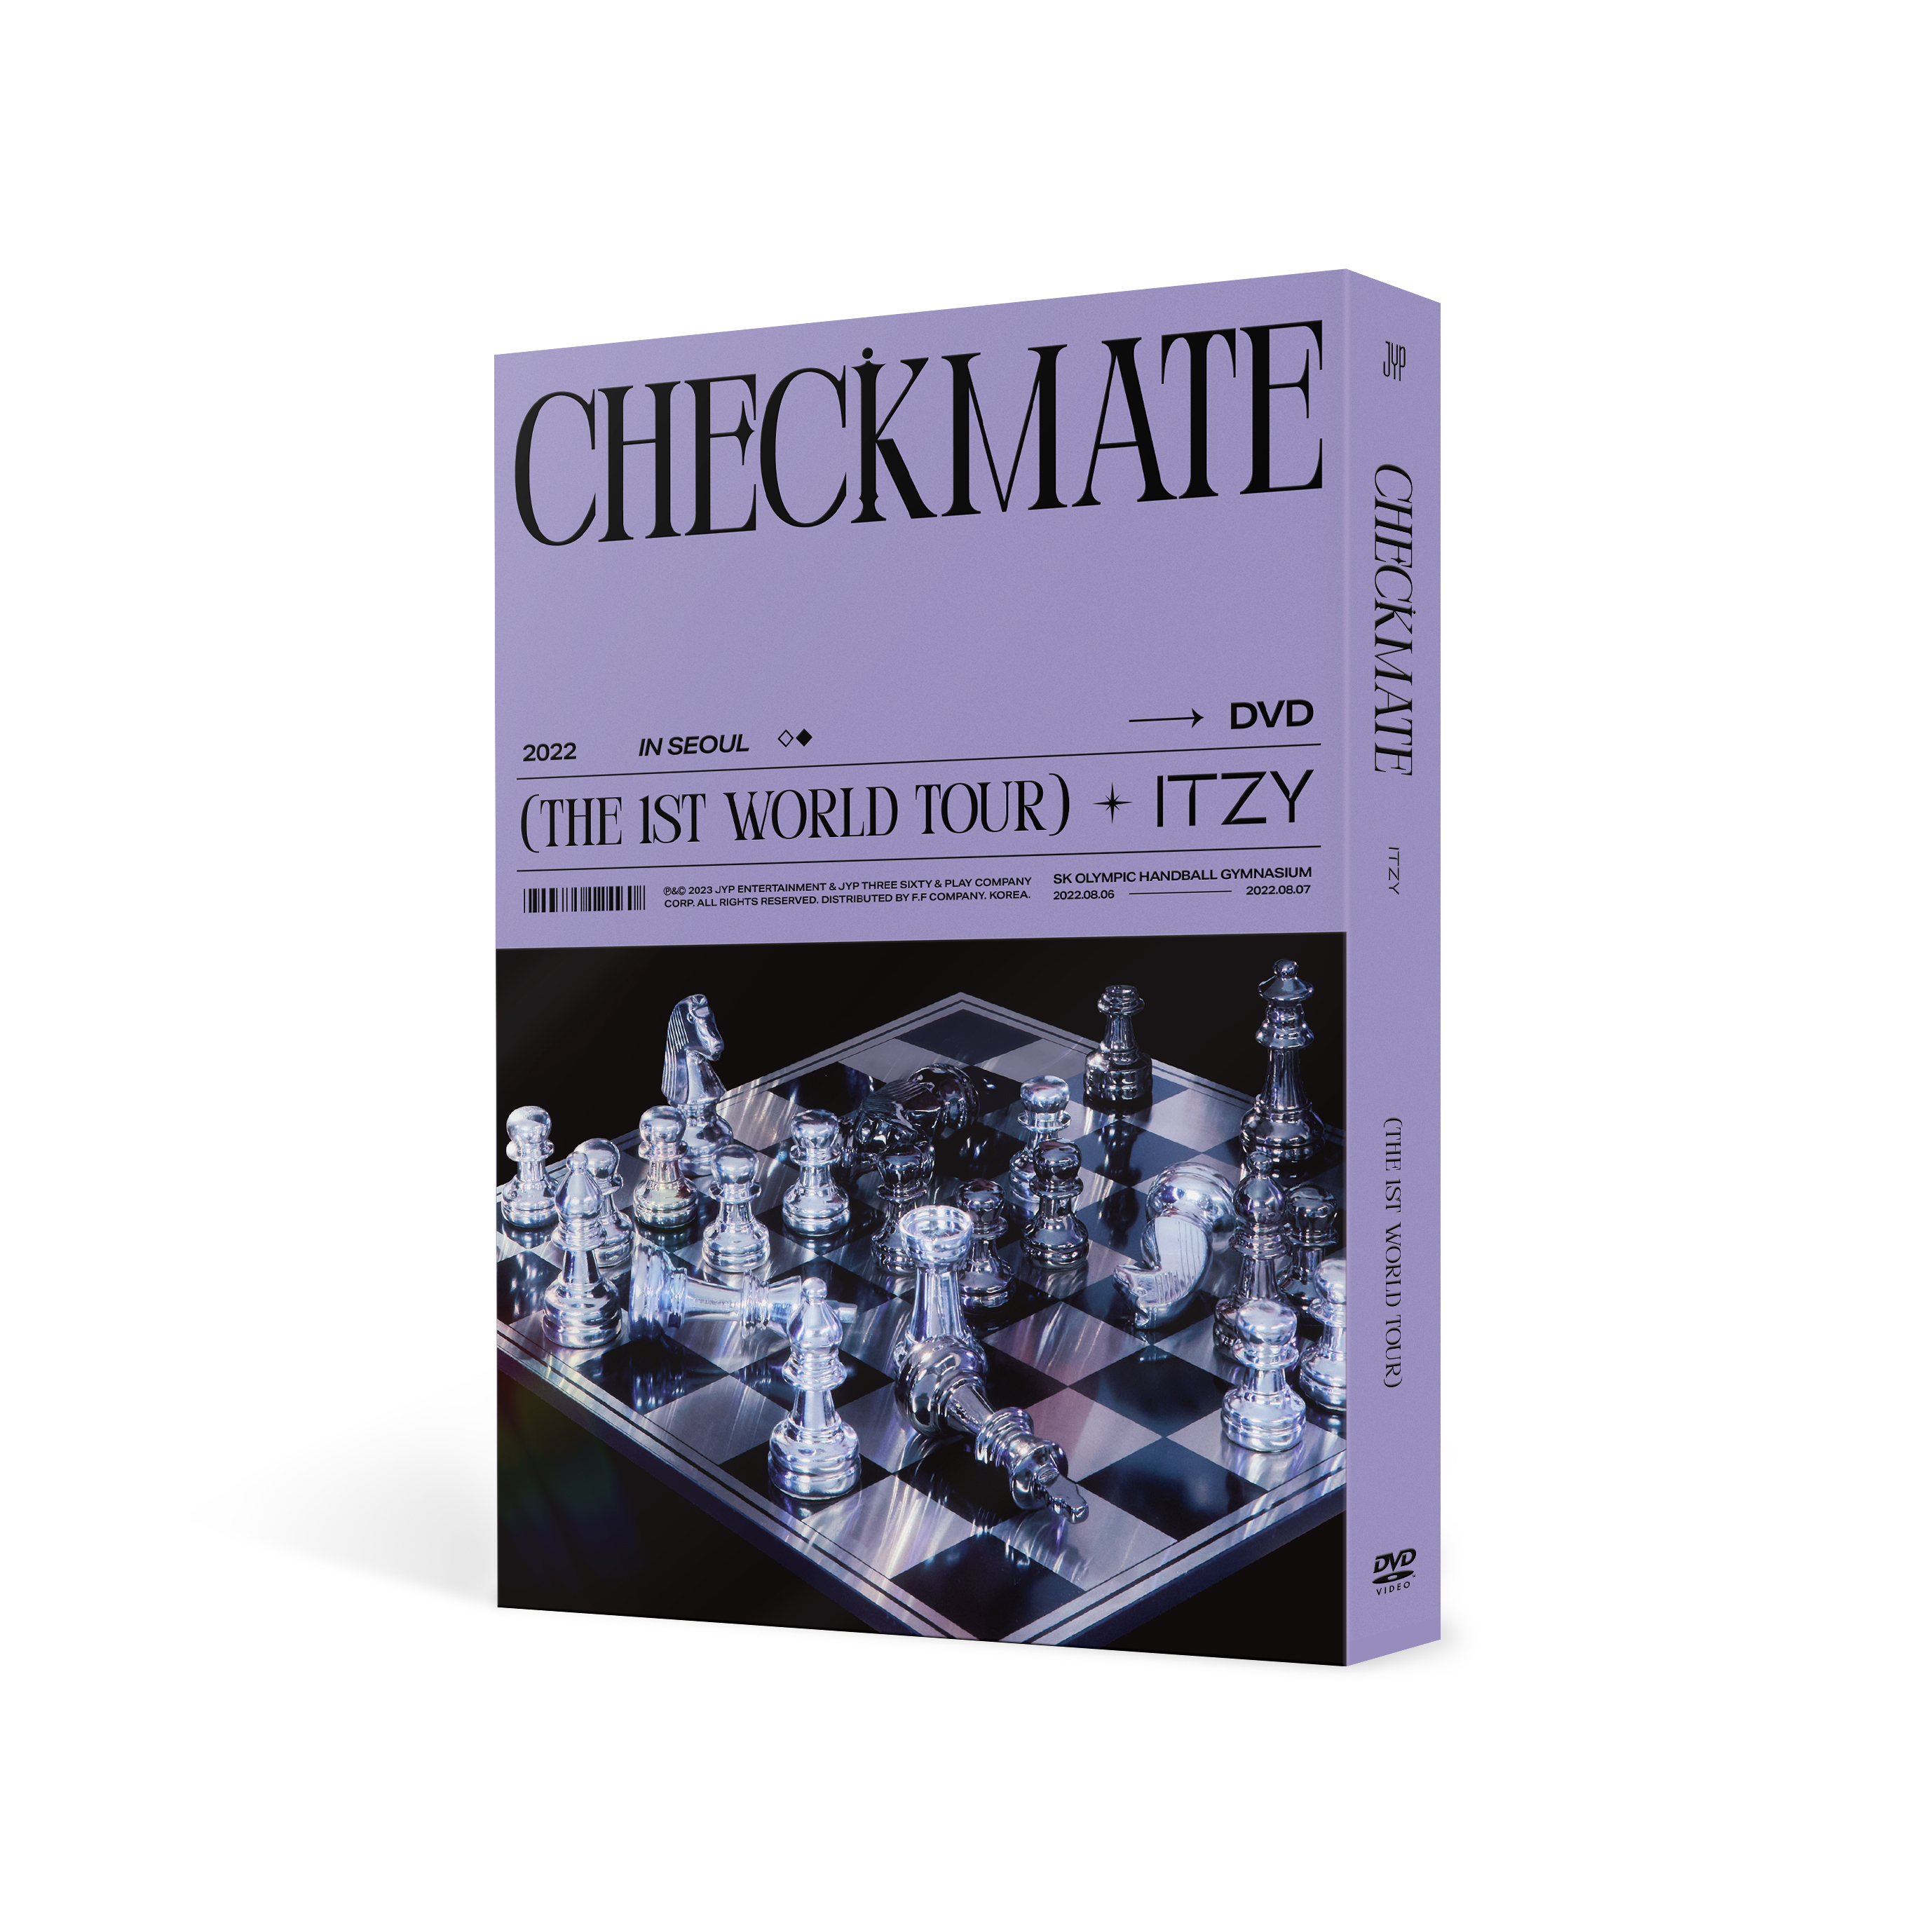 ITZY - 2022 ITZY THE 1ST WORLD TOUR [CHECKMATE] in SEOUL DVD